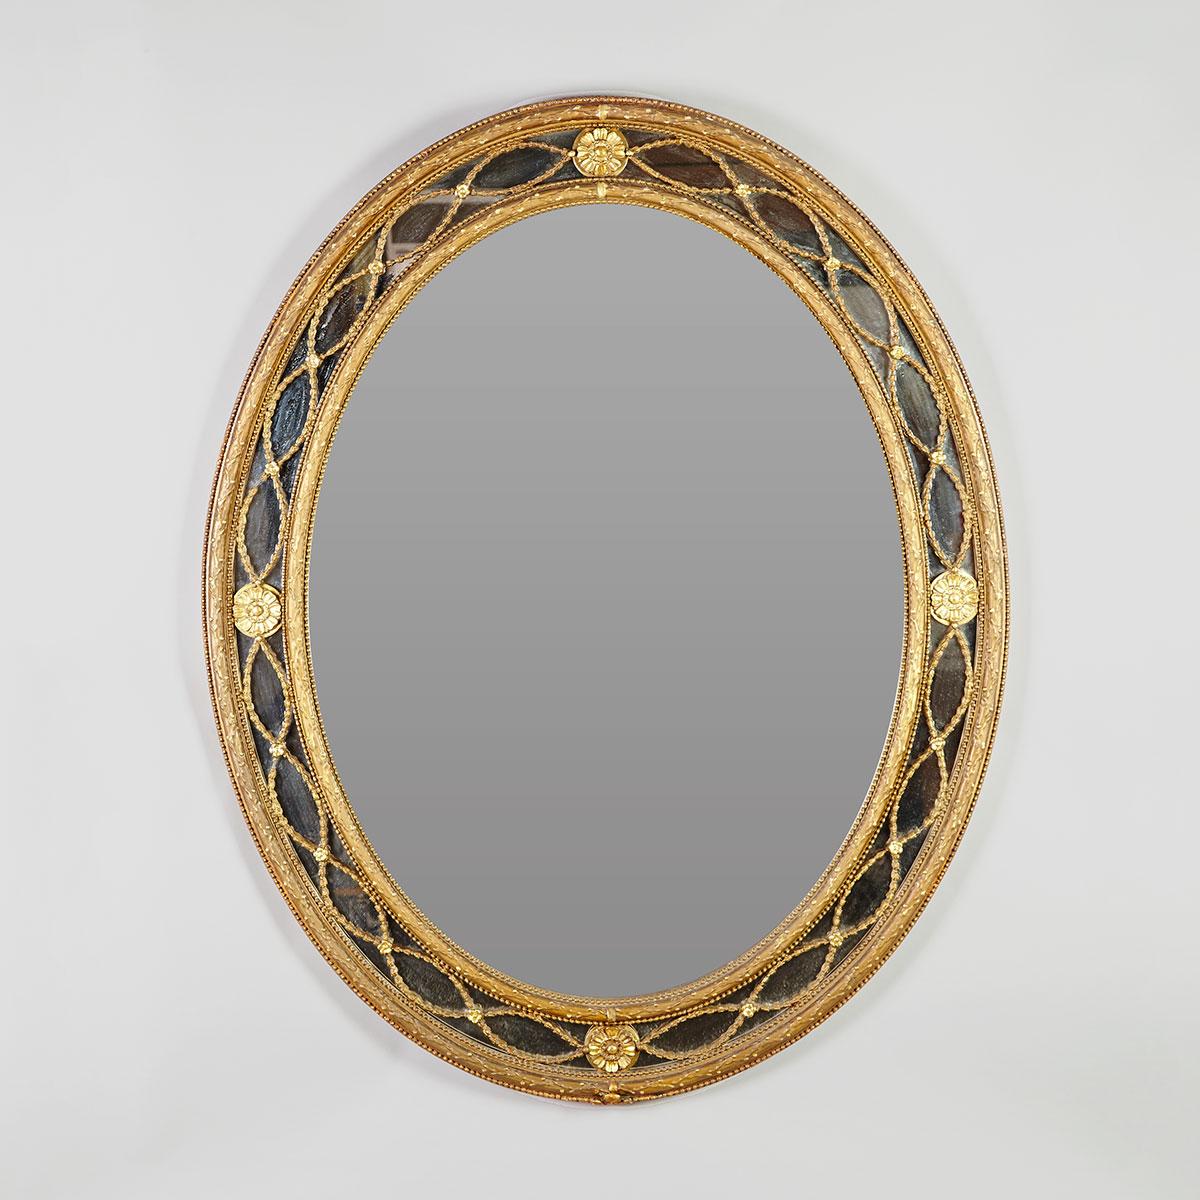 Large Neoclassical Giltwood Oval Mirror Framed Mirror, early 20th century